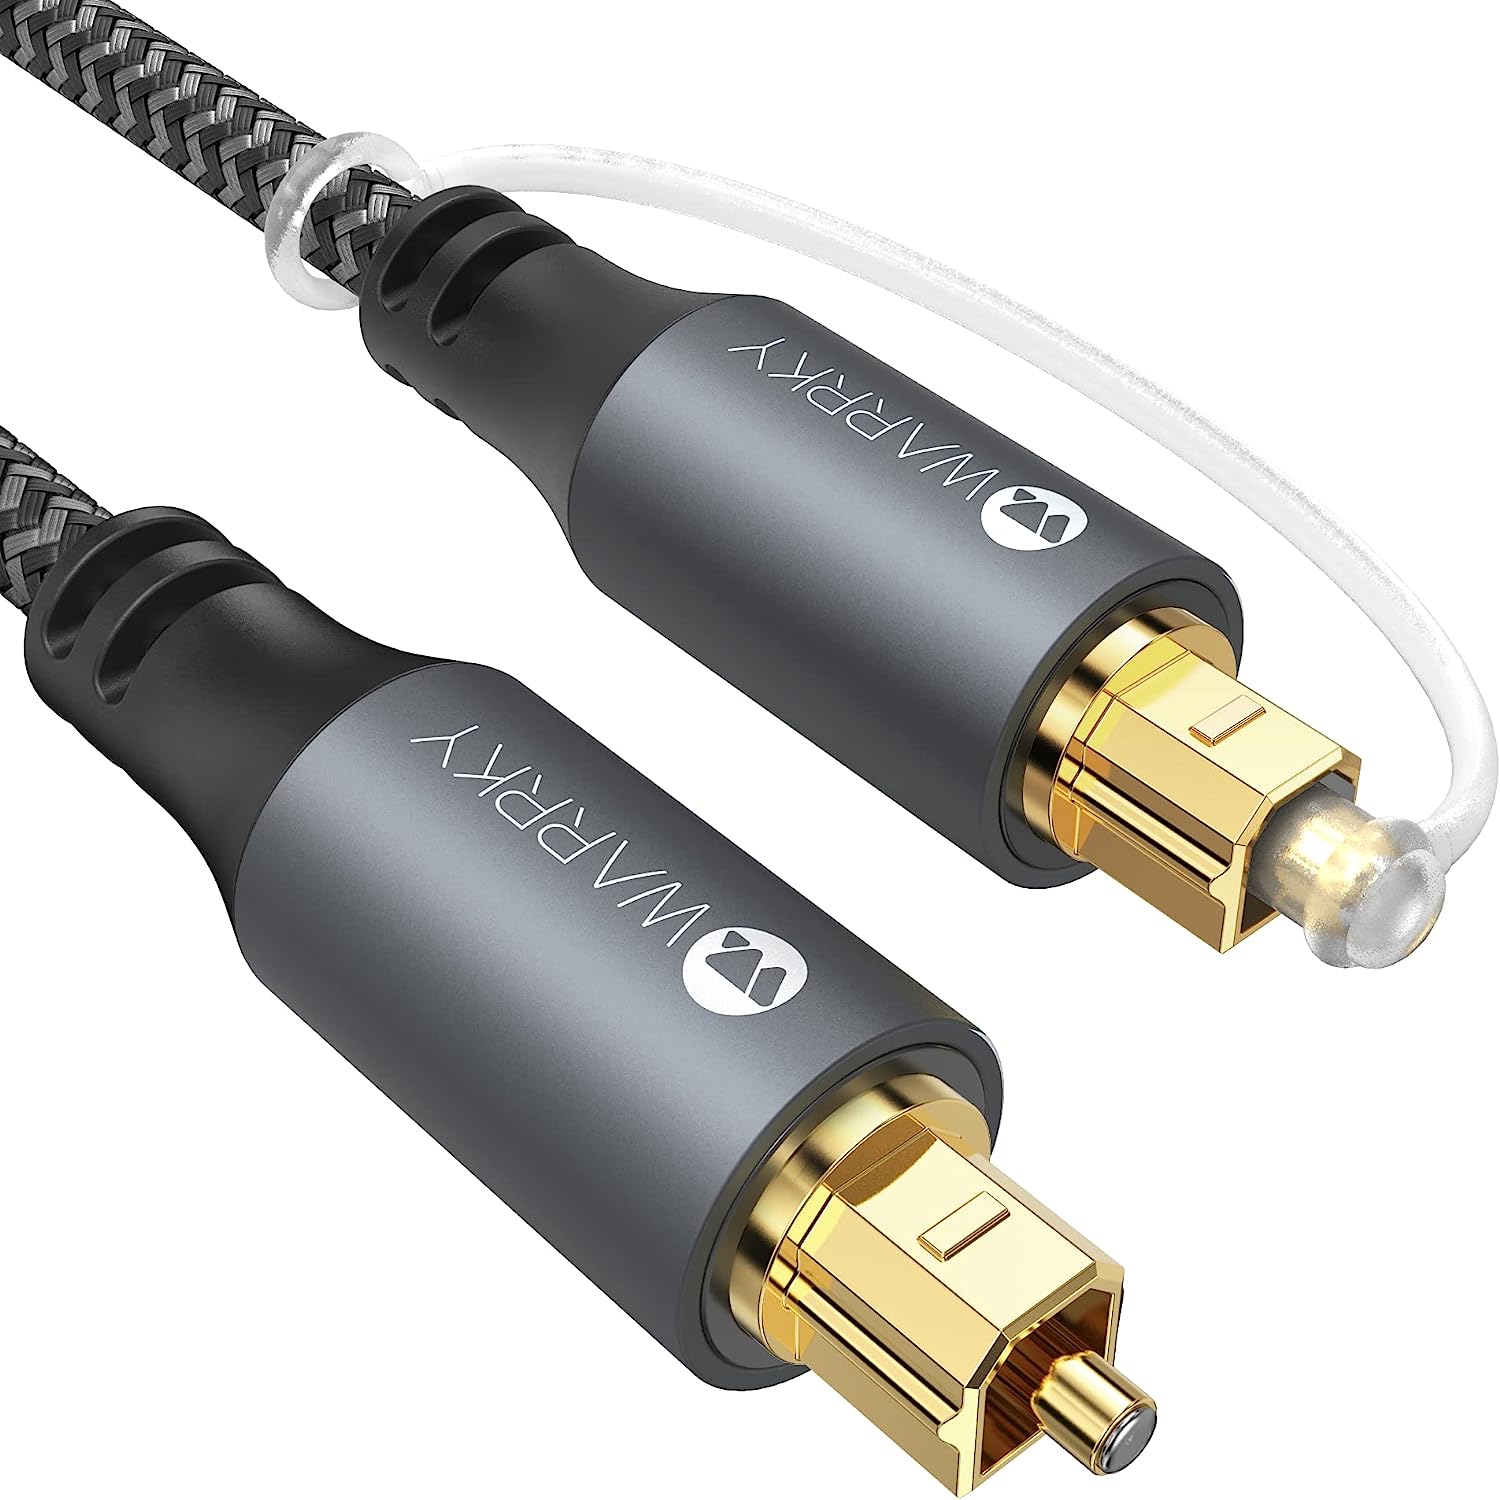 Optical Audio Cable, WARRKY 6ft Optical Cable [...]